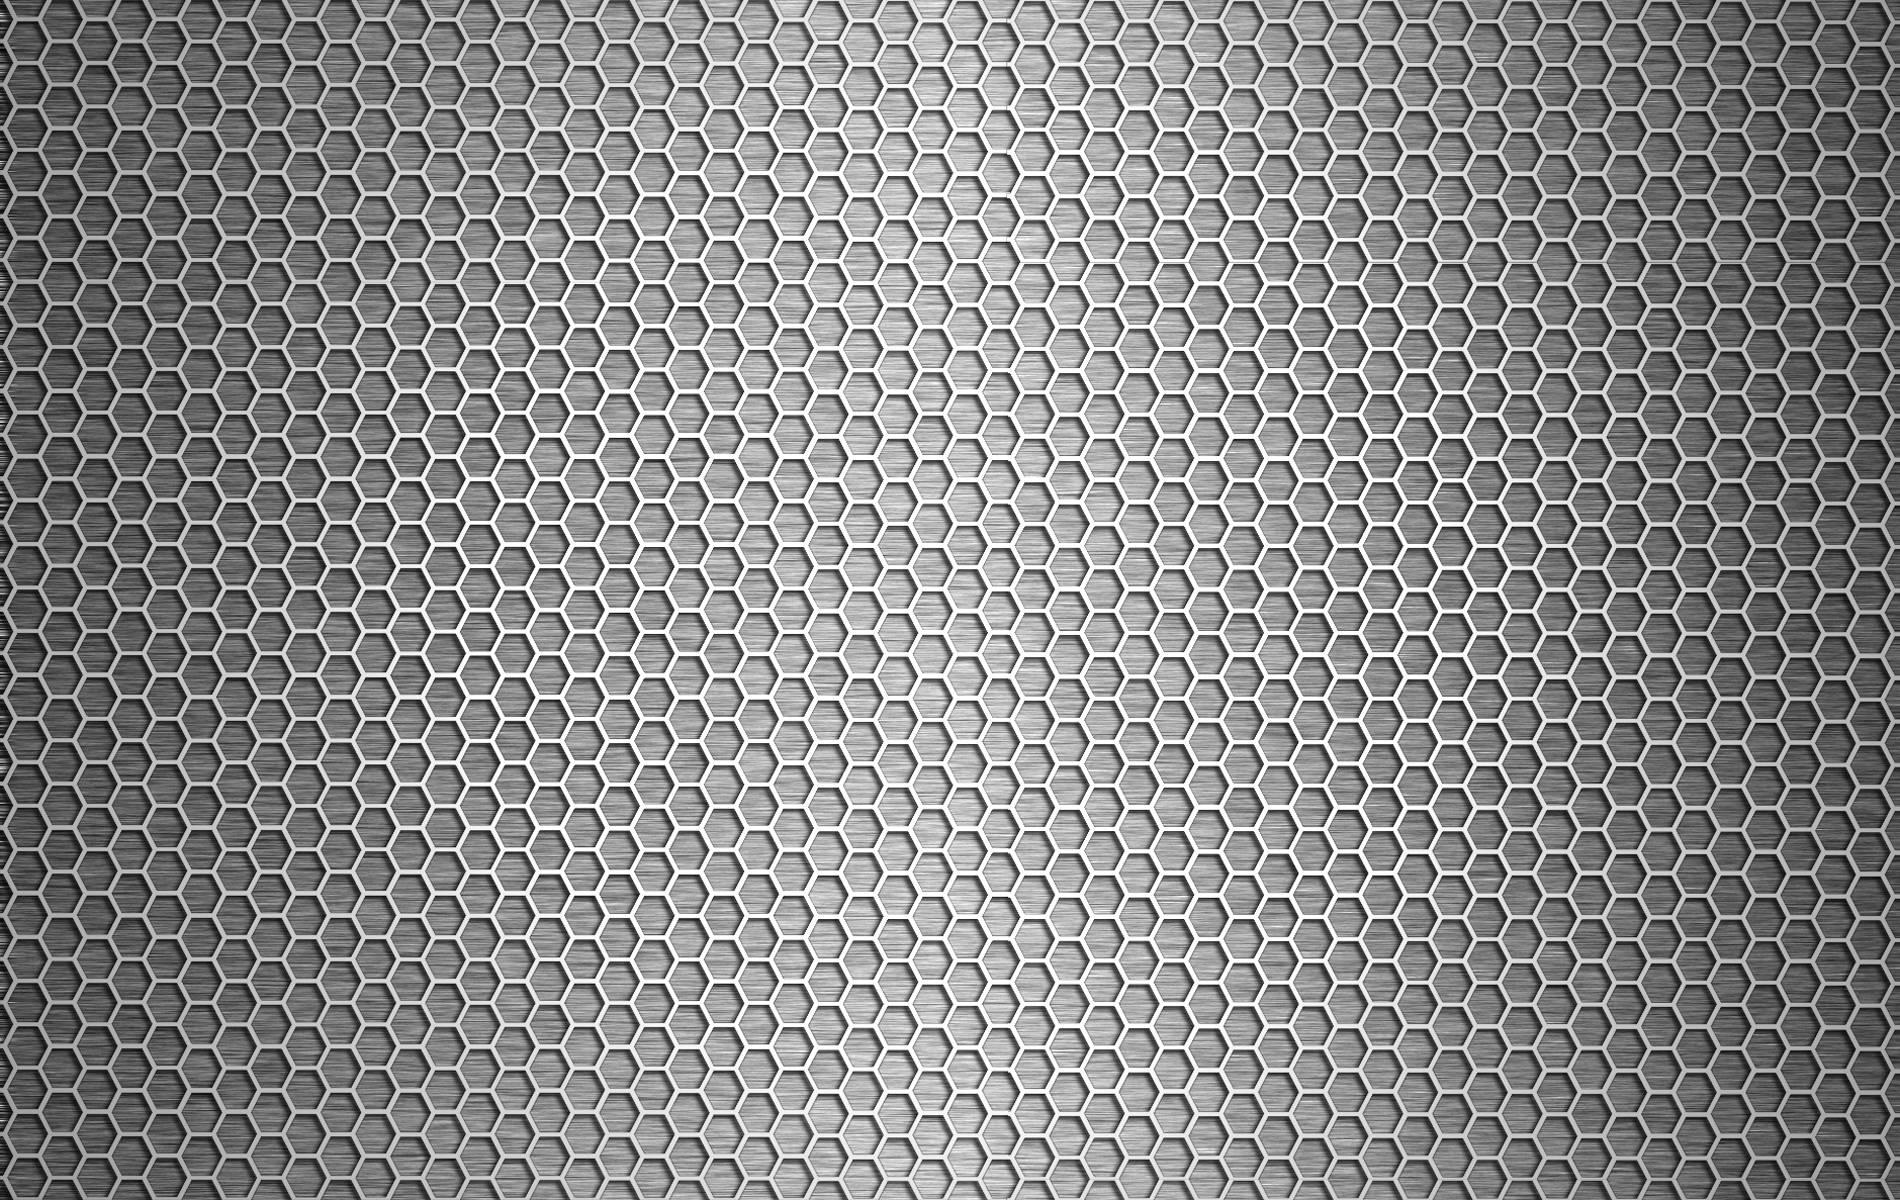 White Black Honeycomb Metal Surface. Background and Texture